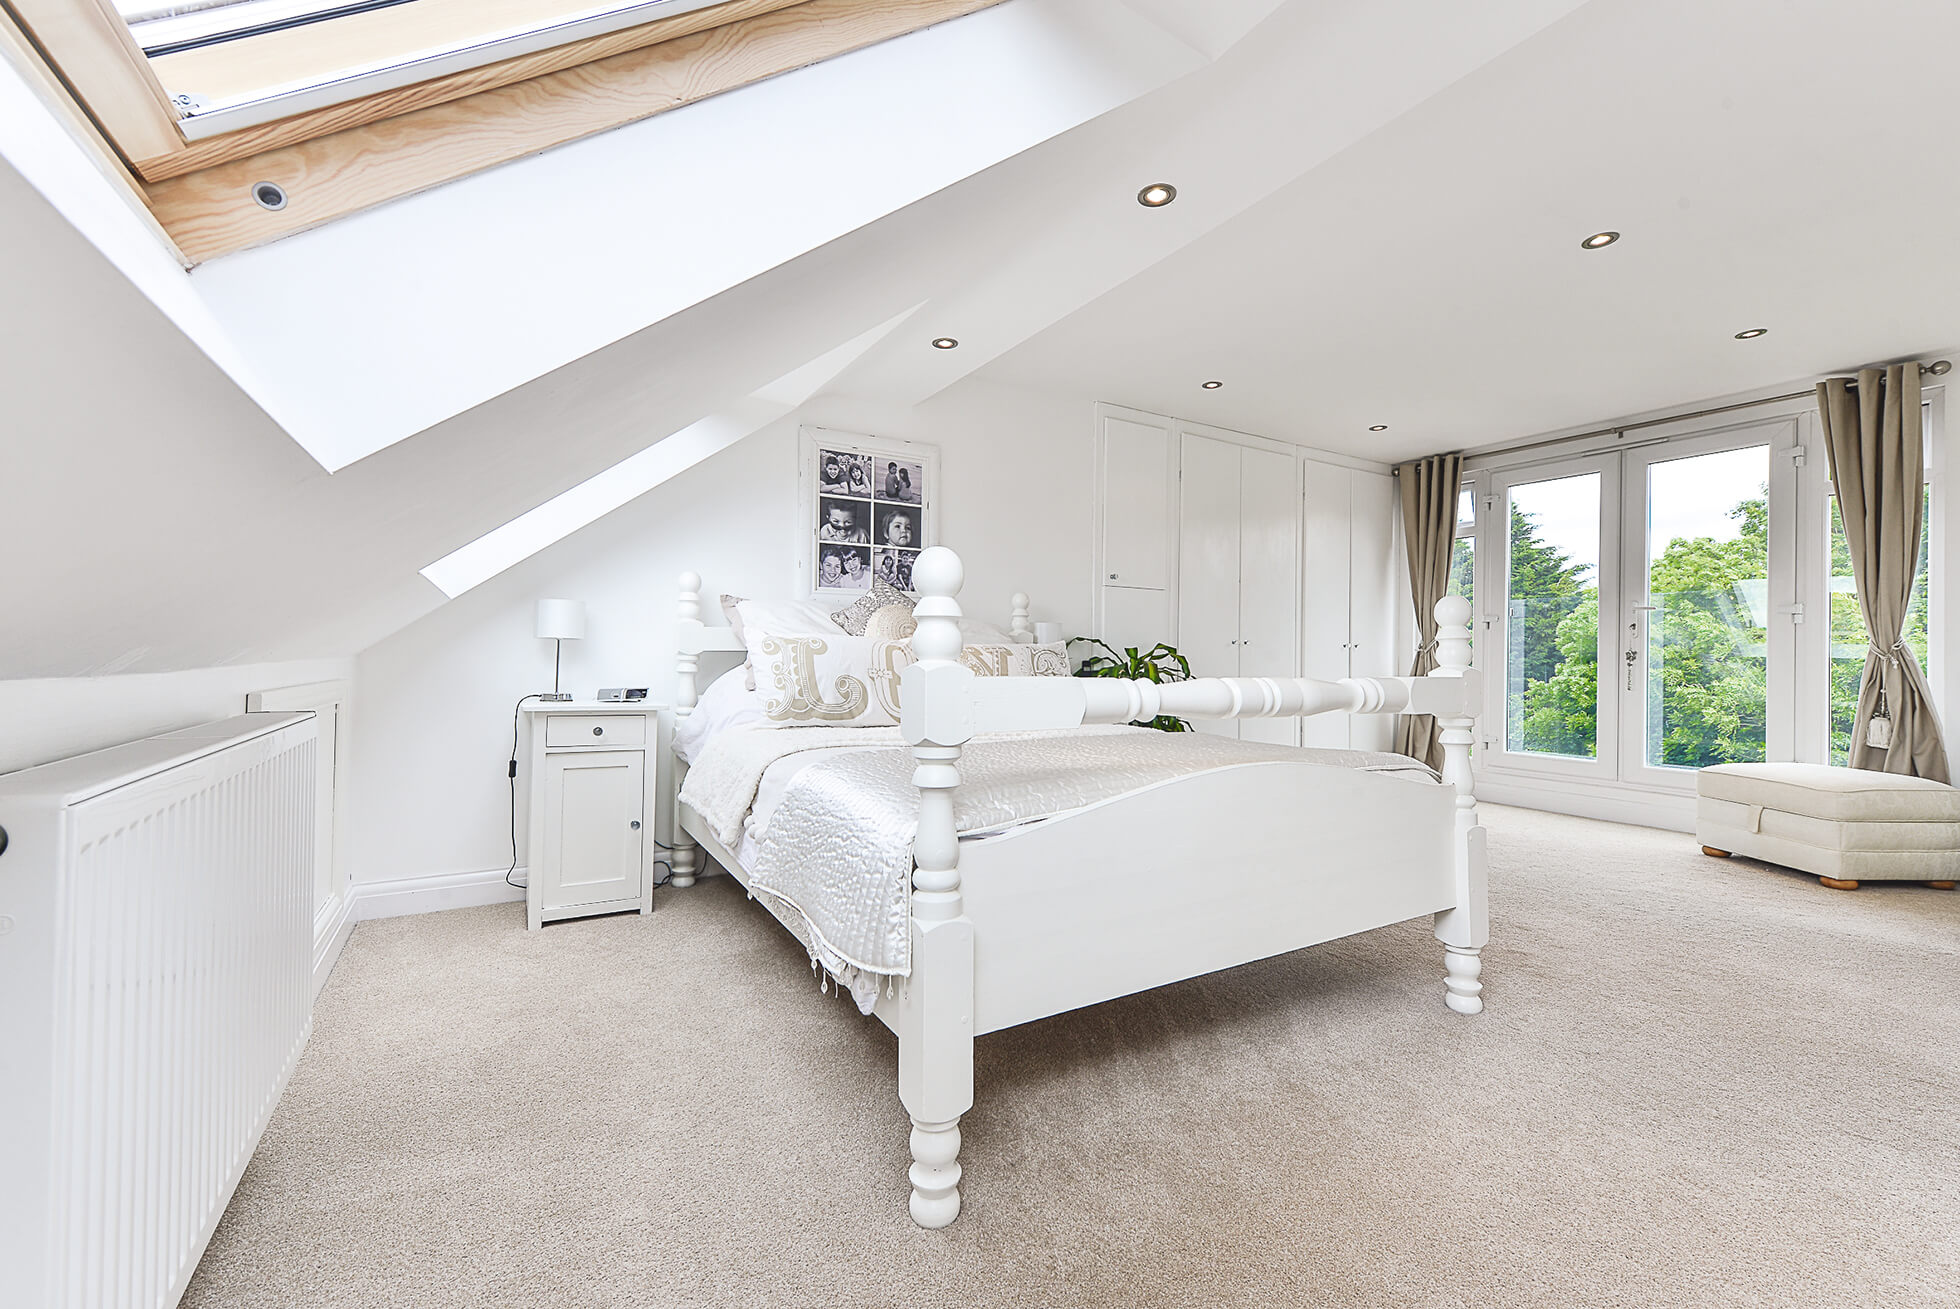 Do you have a question about converting your Loft in Bushey Heath? Here are the most popular questions asked by our clients.